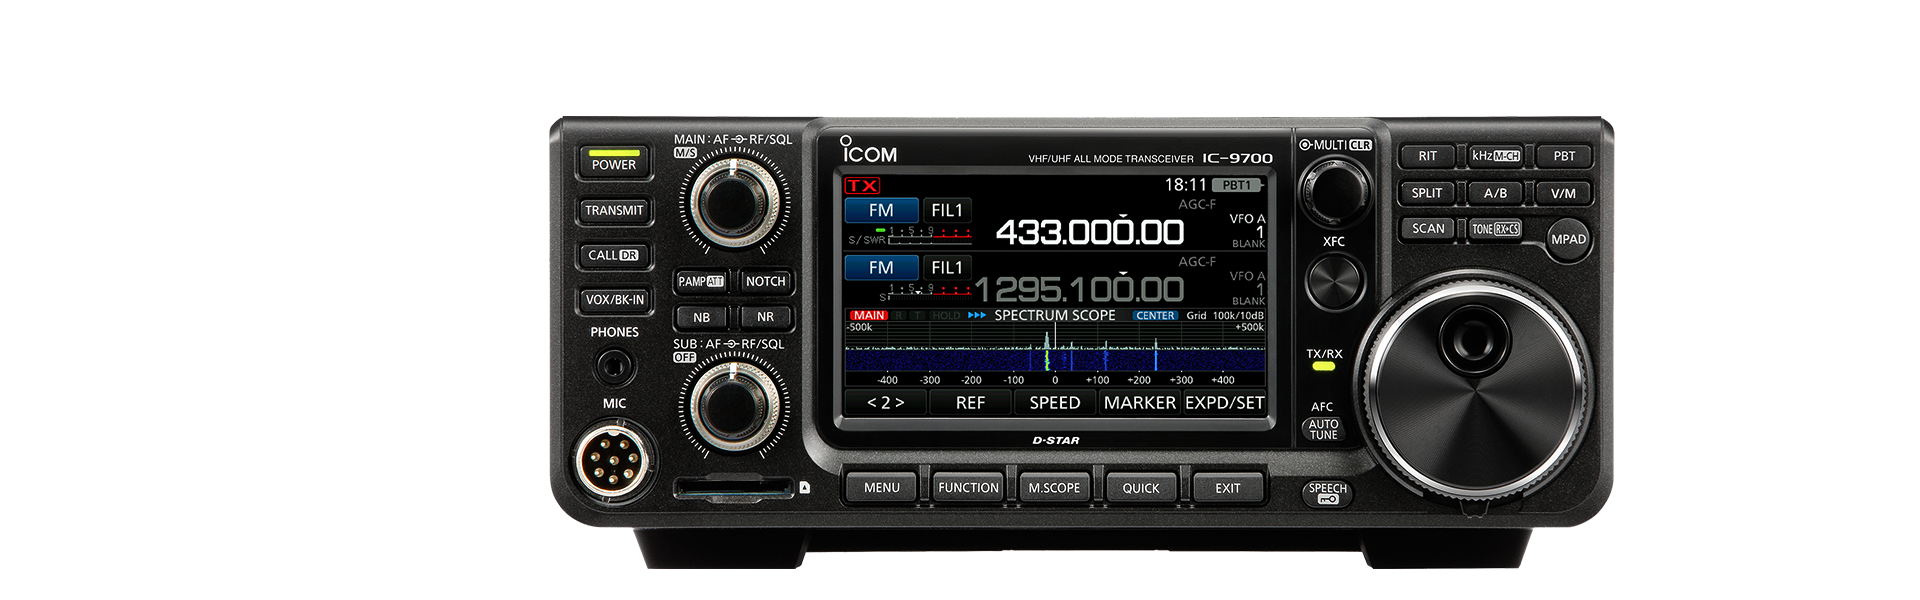 Icom IC-9700 VHF UHF All Mode Transceiver review 6 months on picture